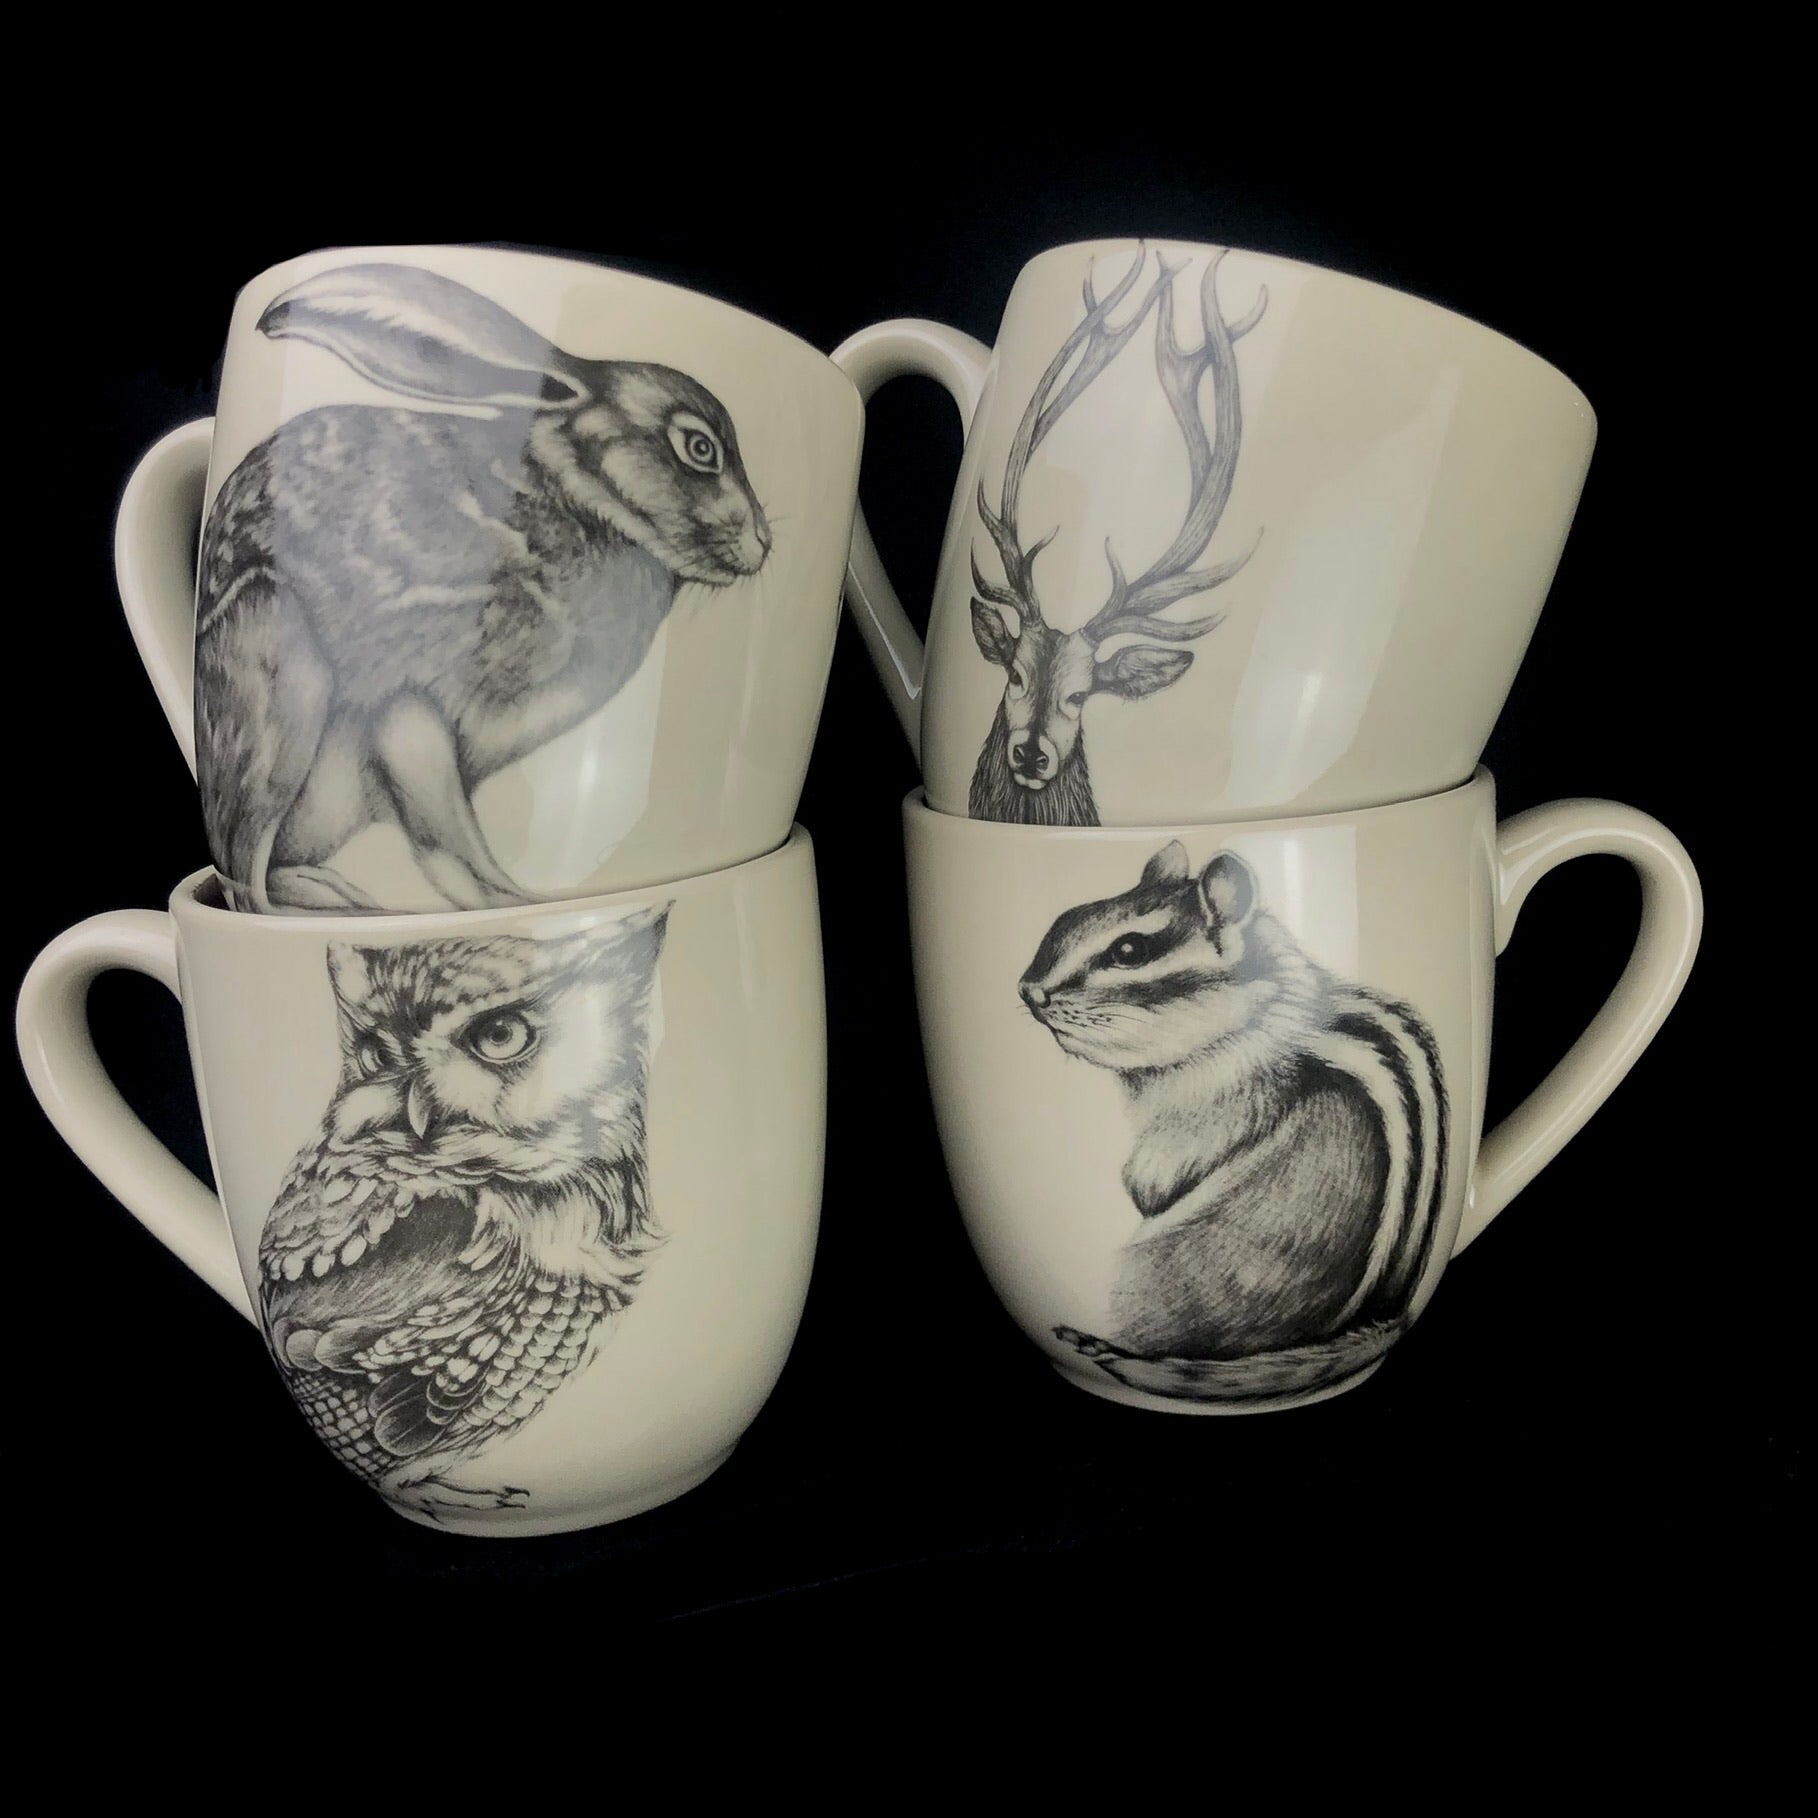 A set of four mugs, including the Buck Mug, with drawings of animals found in the forest.  Rabbit, Owl and Chipmunk.